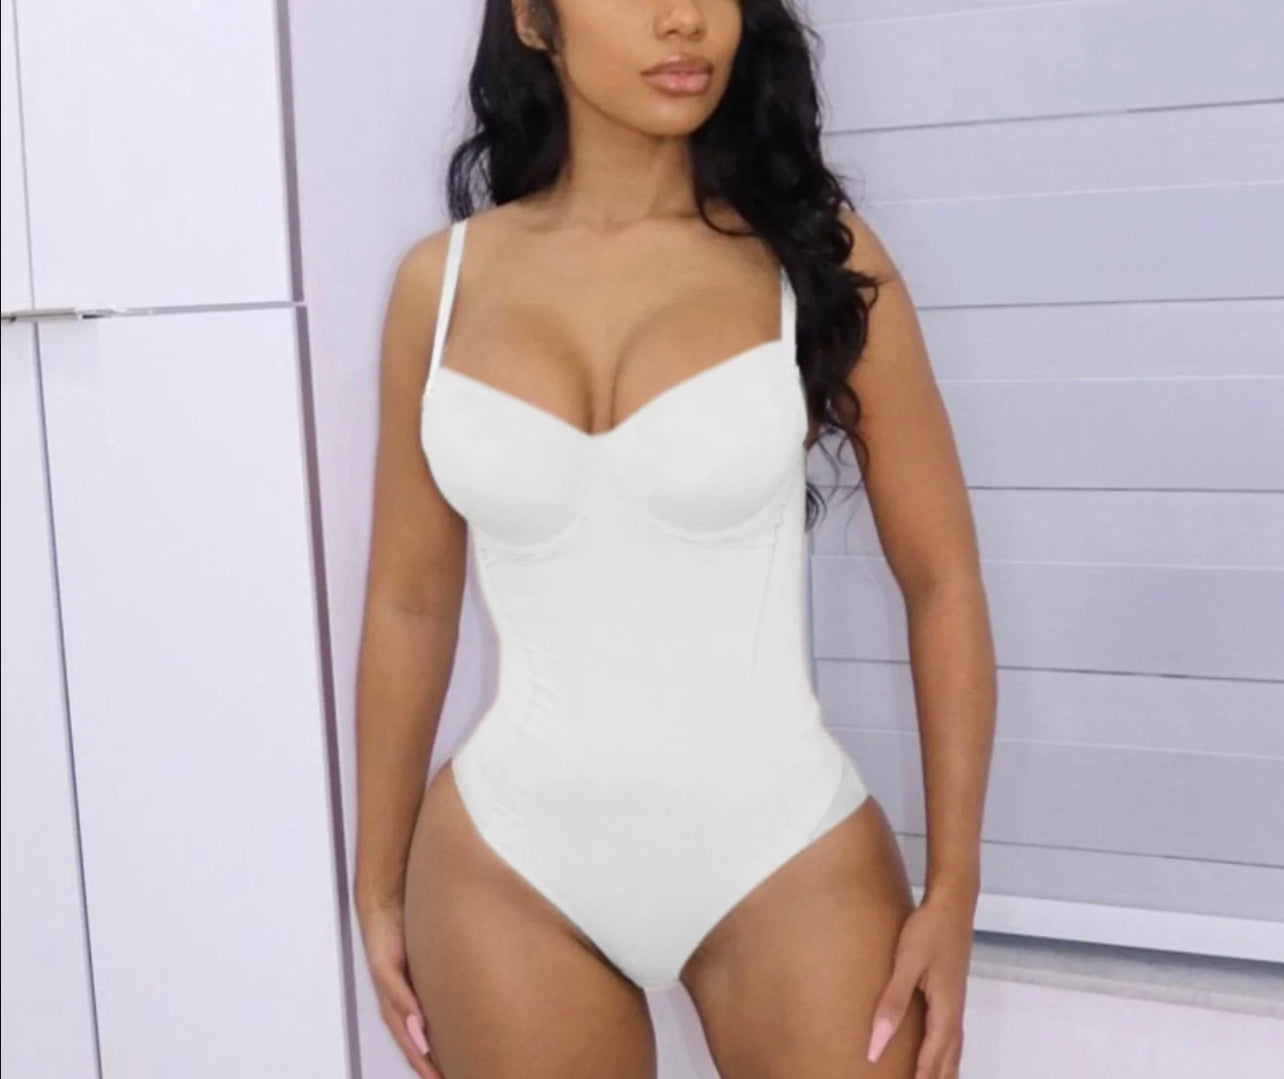 “Snatched” body suit